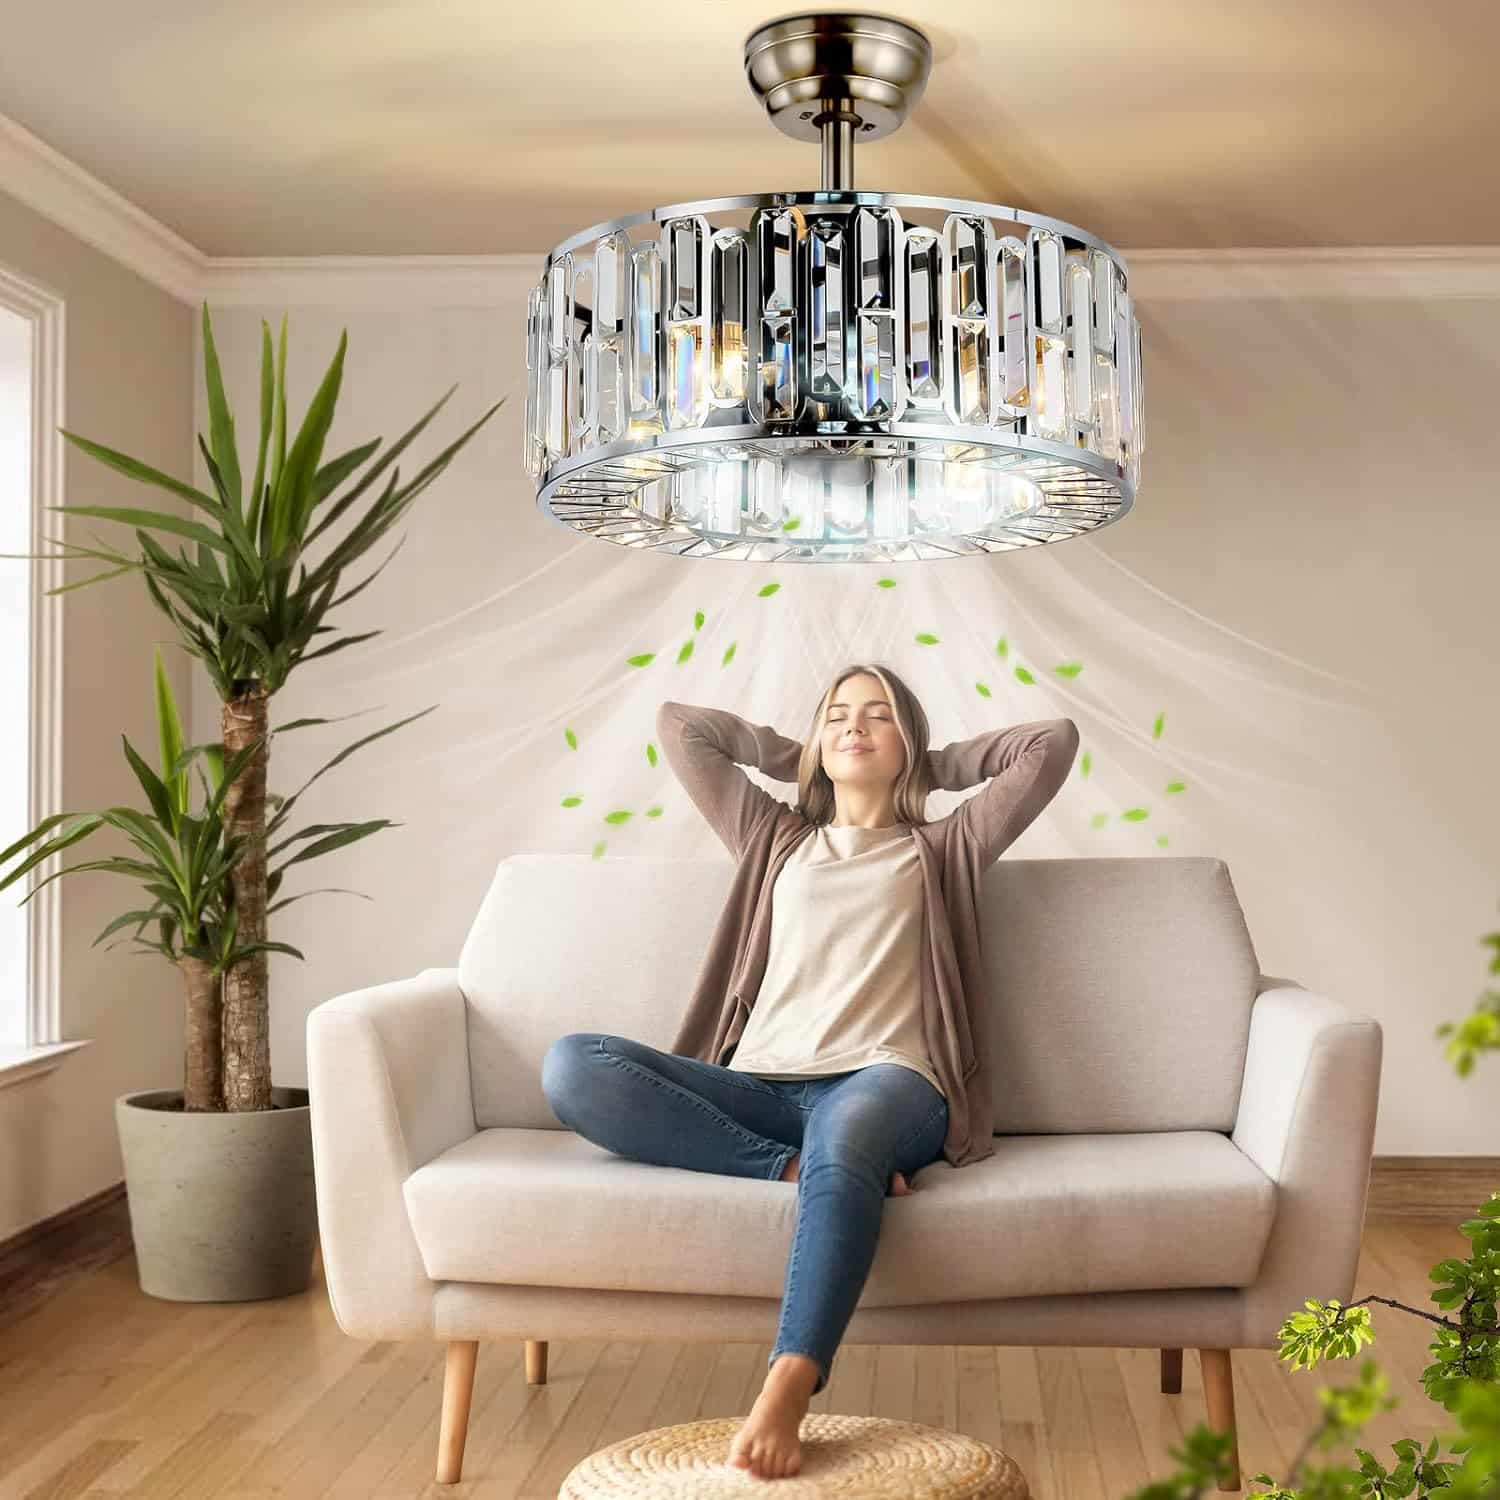 A Million 42 Luxury Crystal Ceiling Fan with Light, Gold Crystal Chandelier with Retractable Fan Remote 3 Speed 3 Color Silent Motor Fandelier Lighting Fixture for Living Dining Room Island